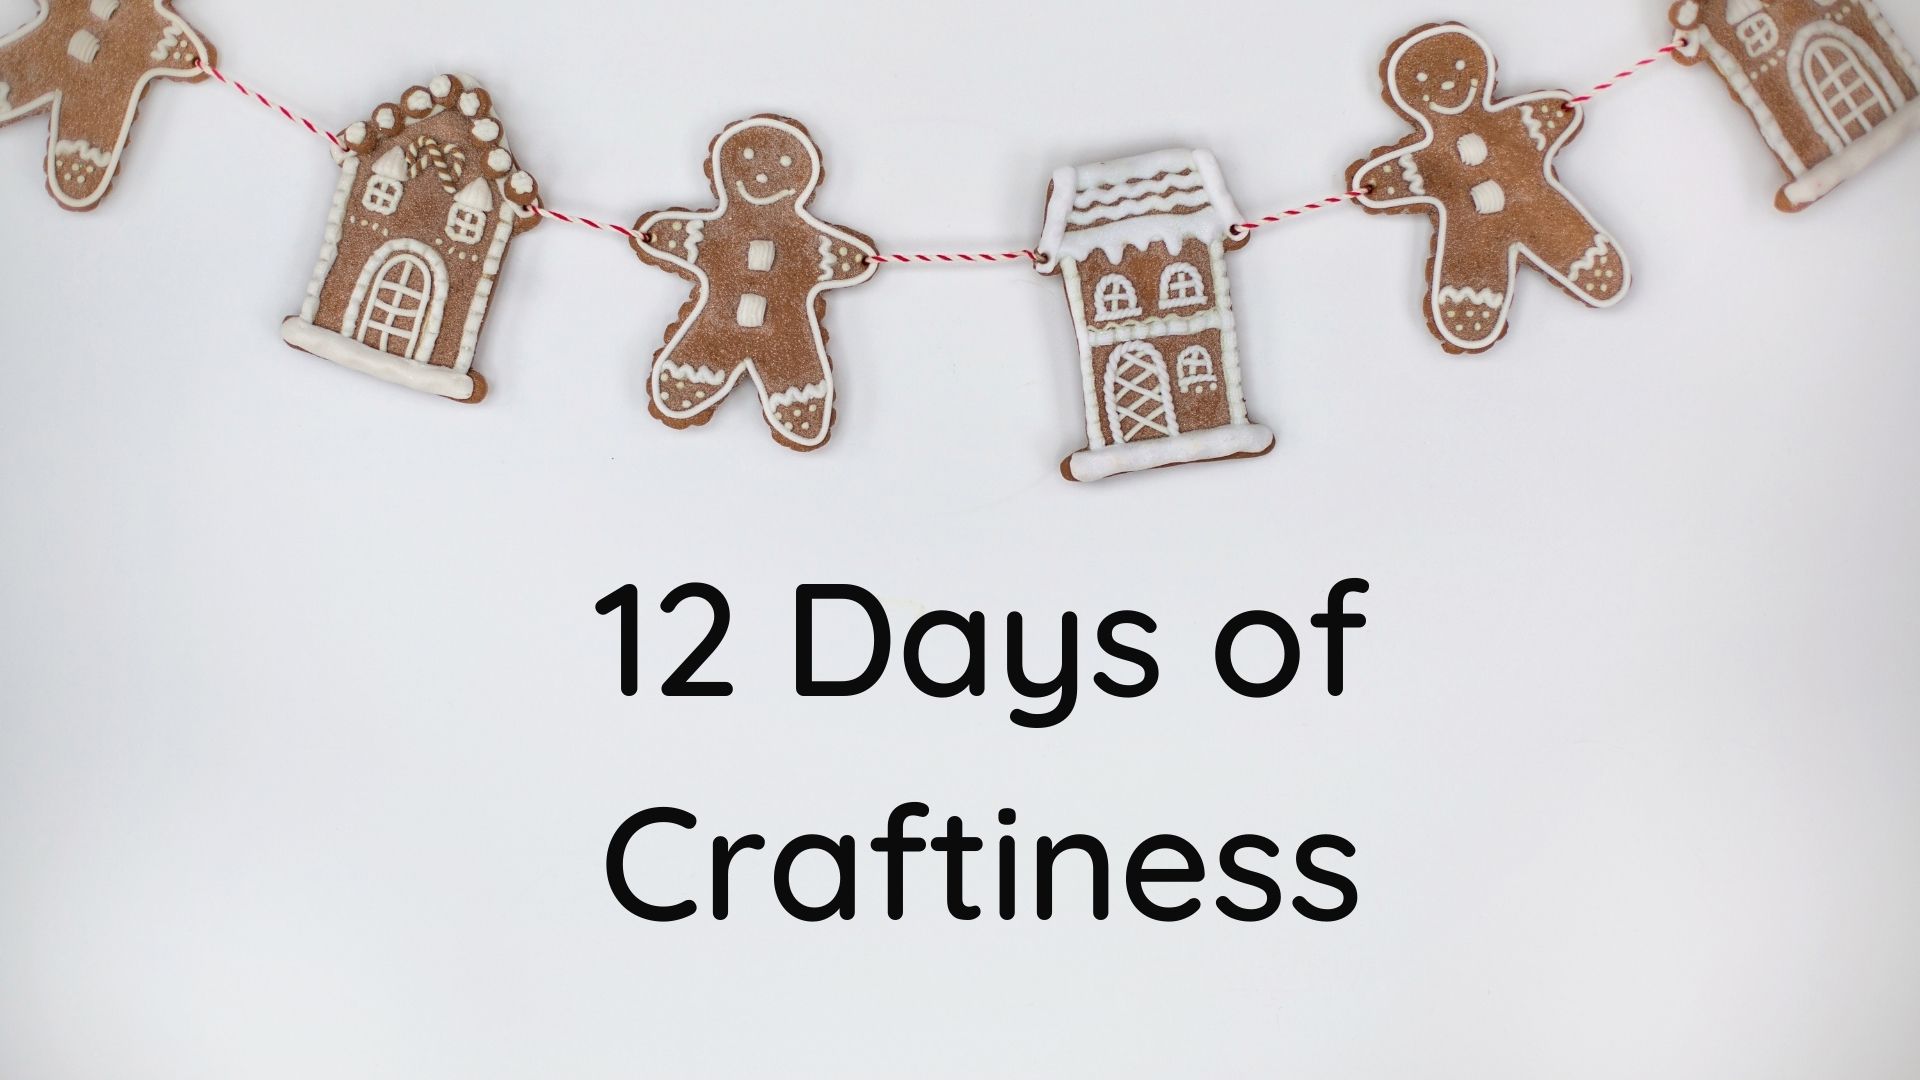 For Kids 12 Days of Craftiness